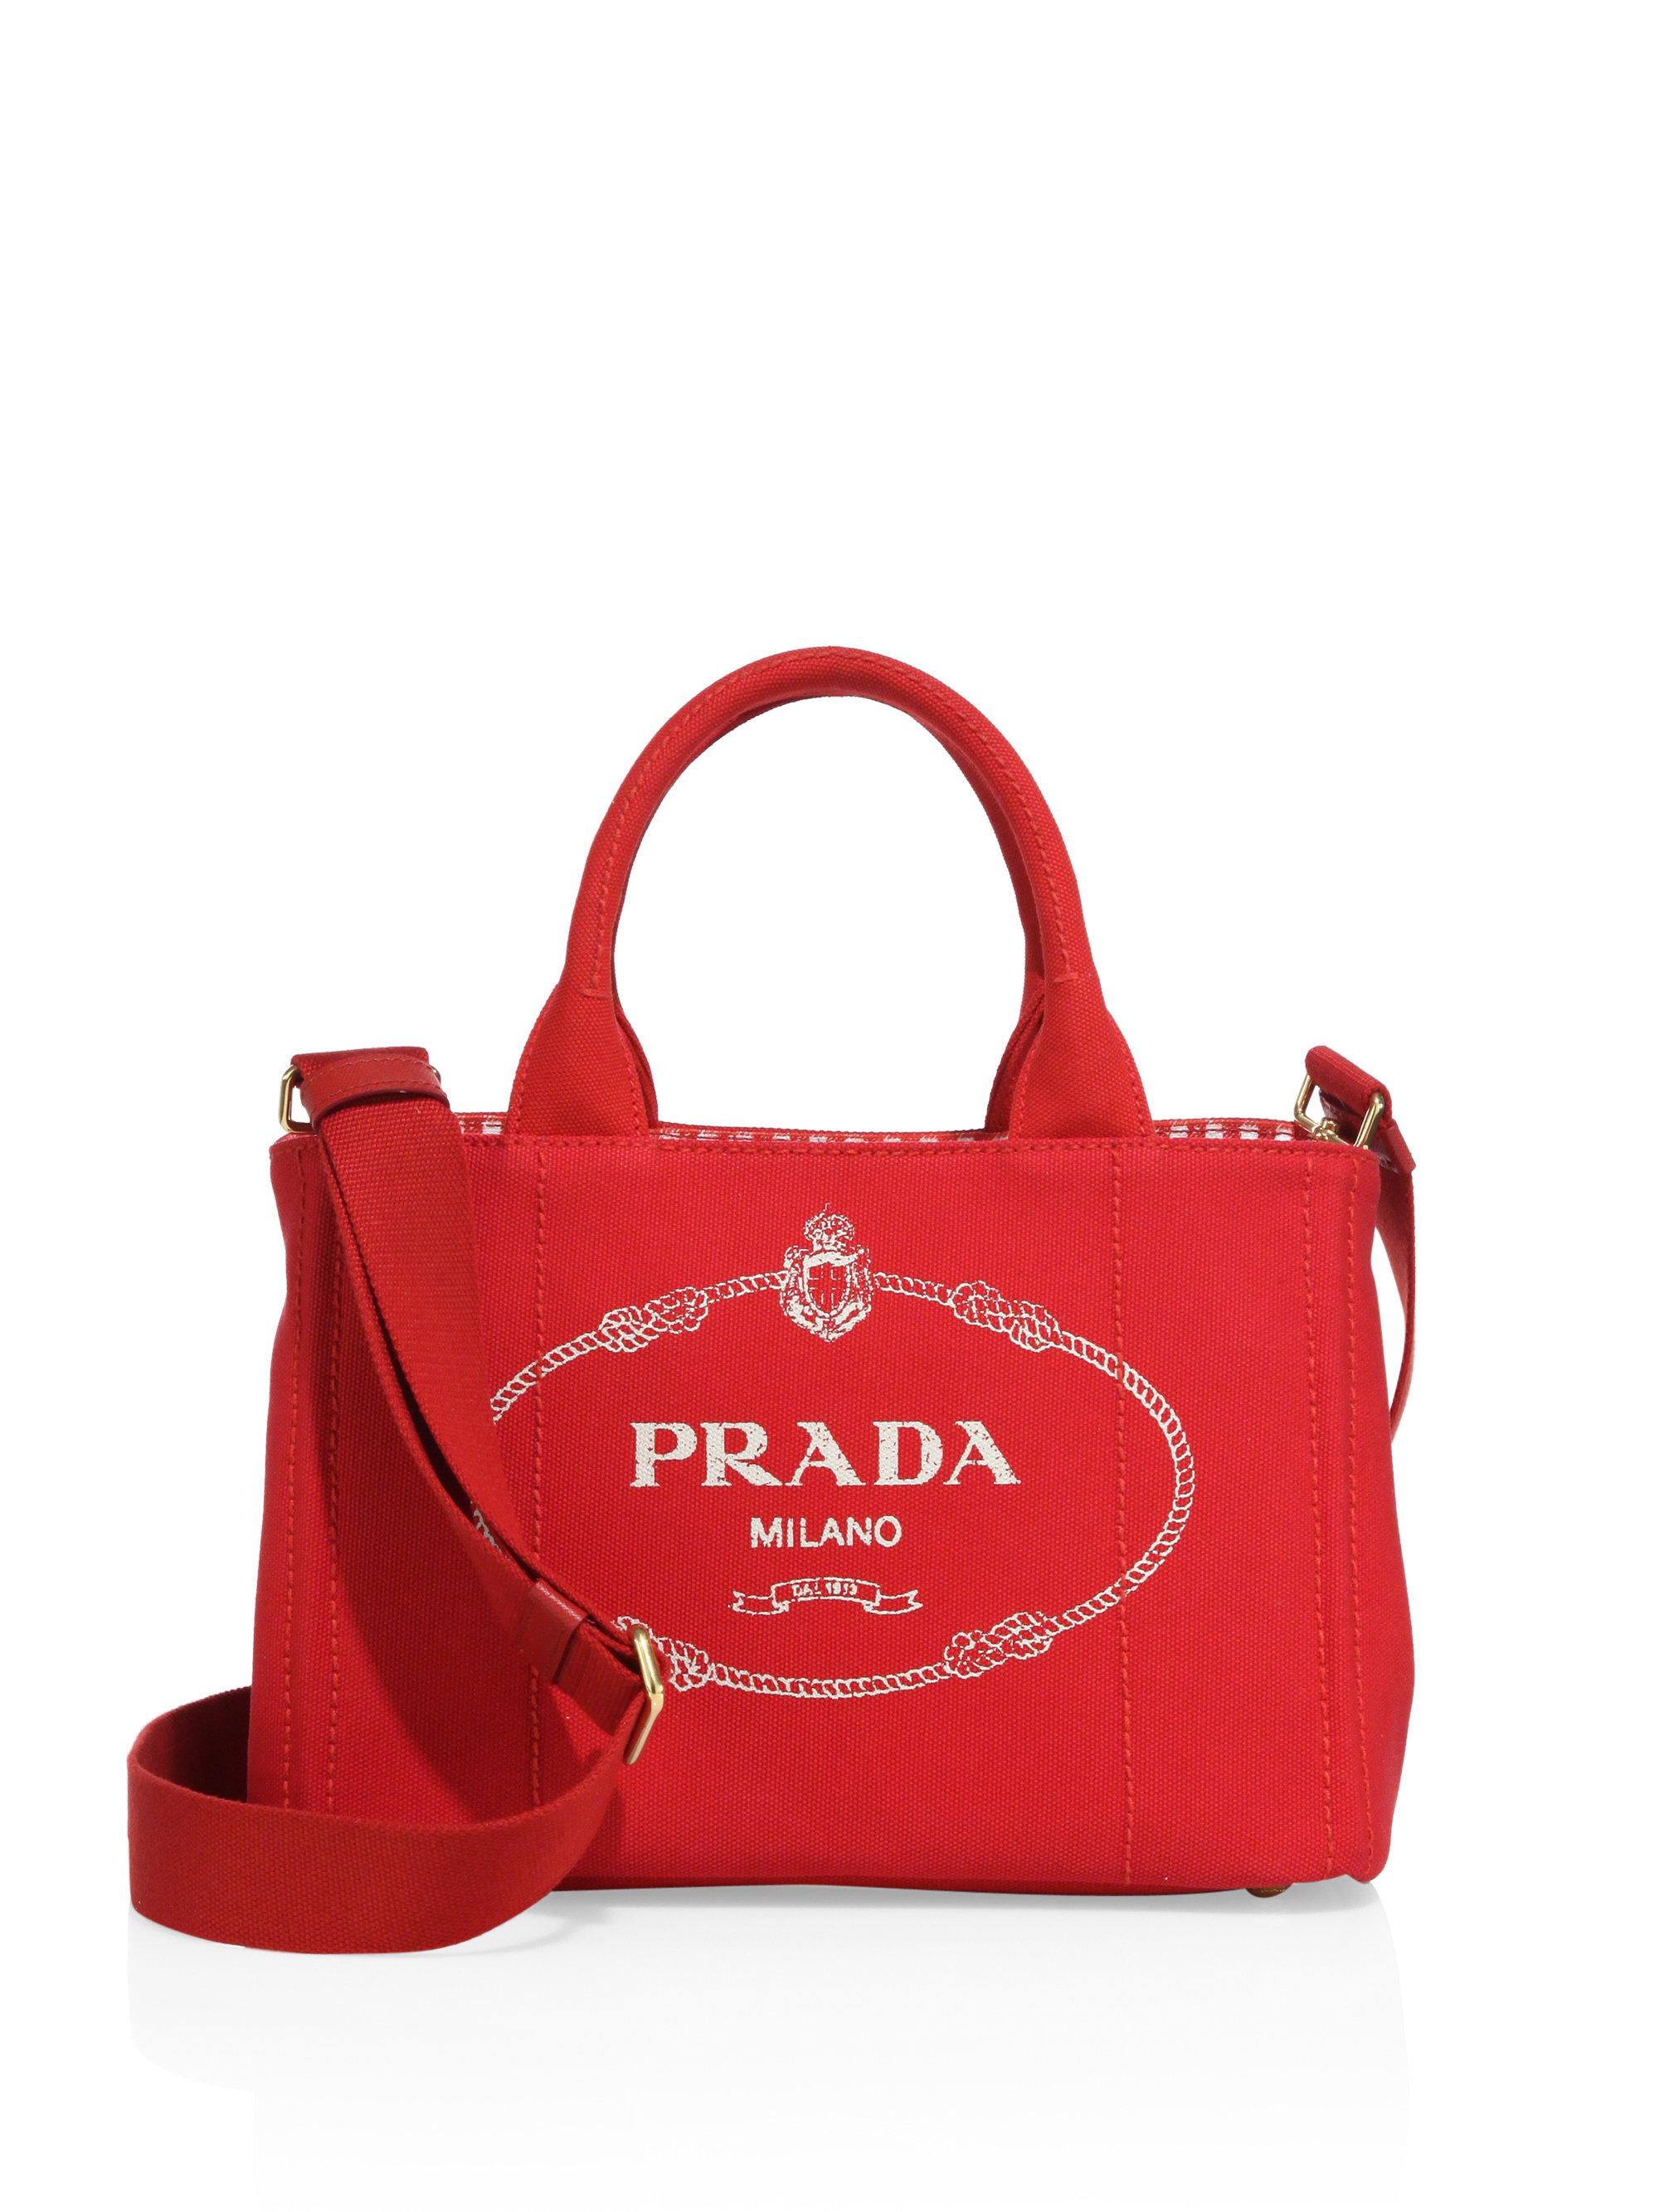 Prada Canapa Canvas Tote in Red | Lyst